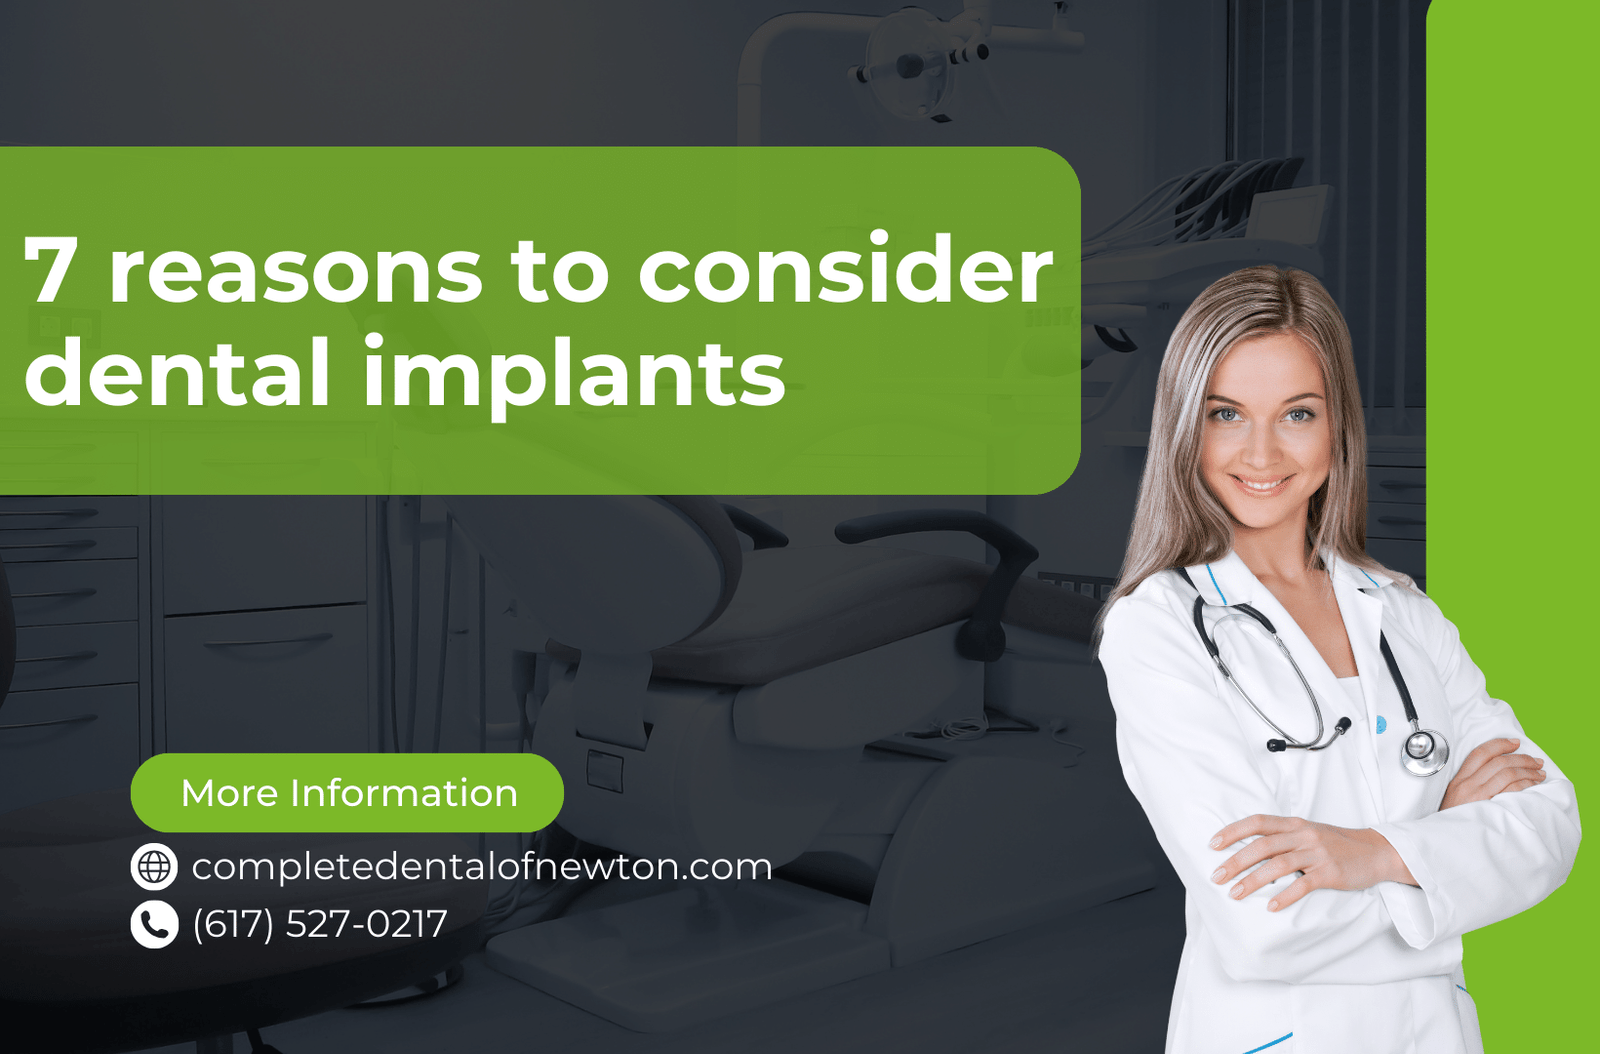 7 reasons to consider dental implants